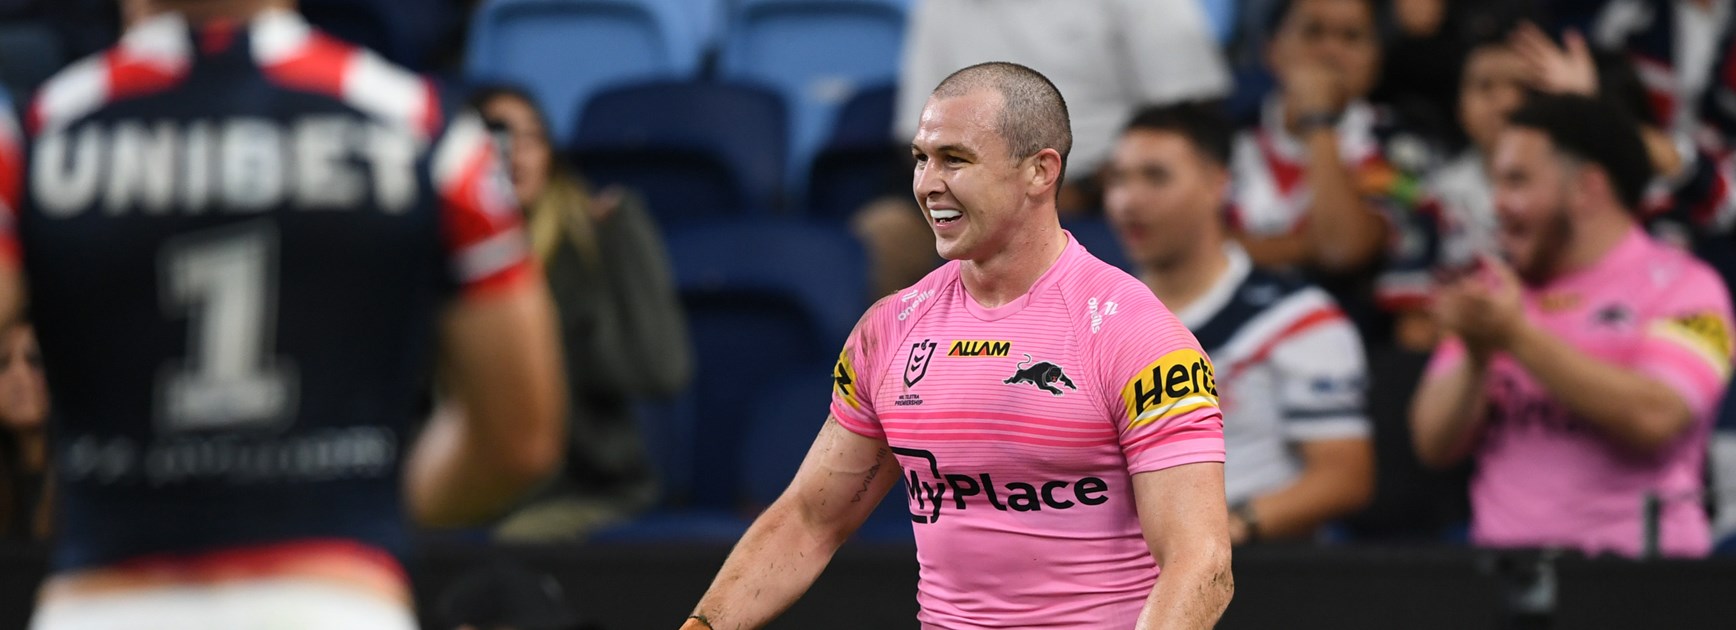 NRL Wrap-Up: Round 4 - Hynes sets Dally M pace; Dolphins on top